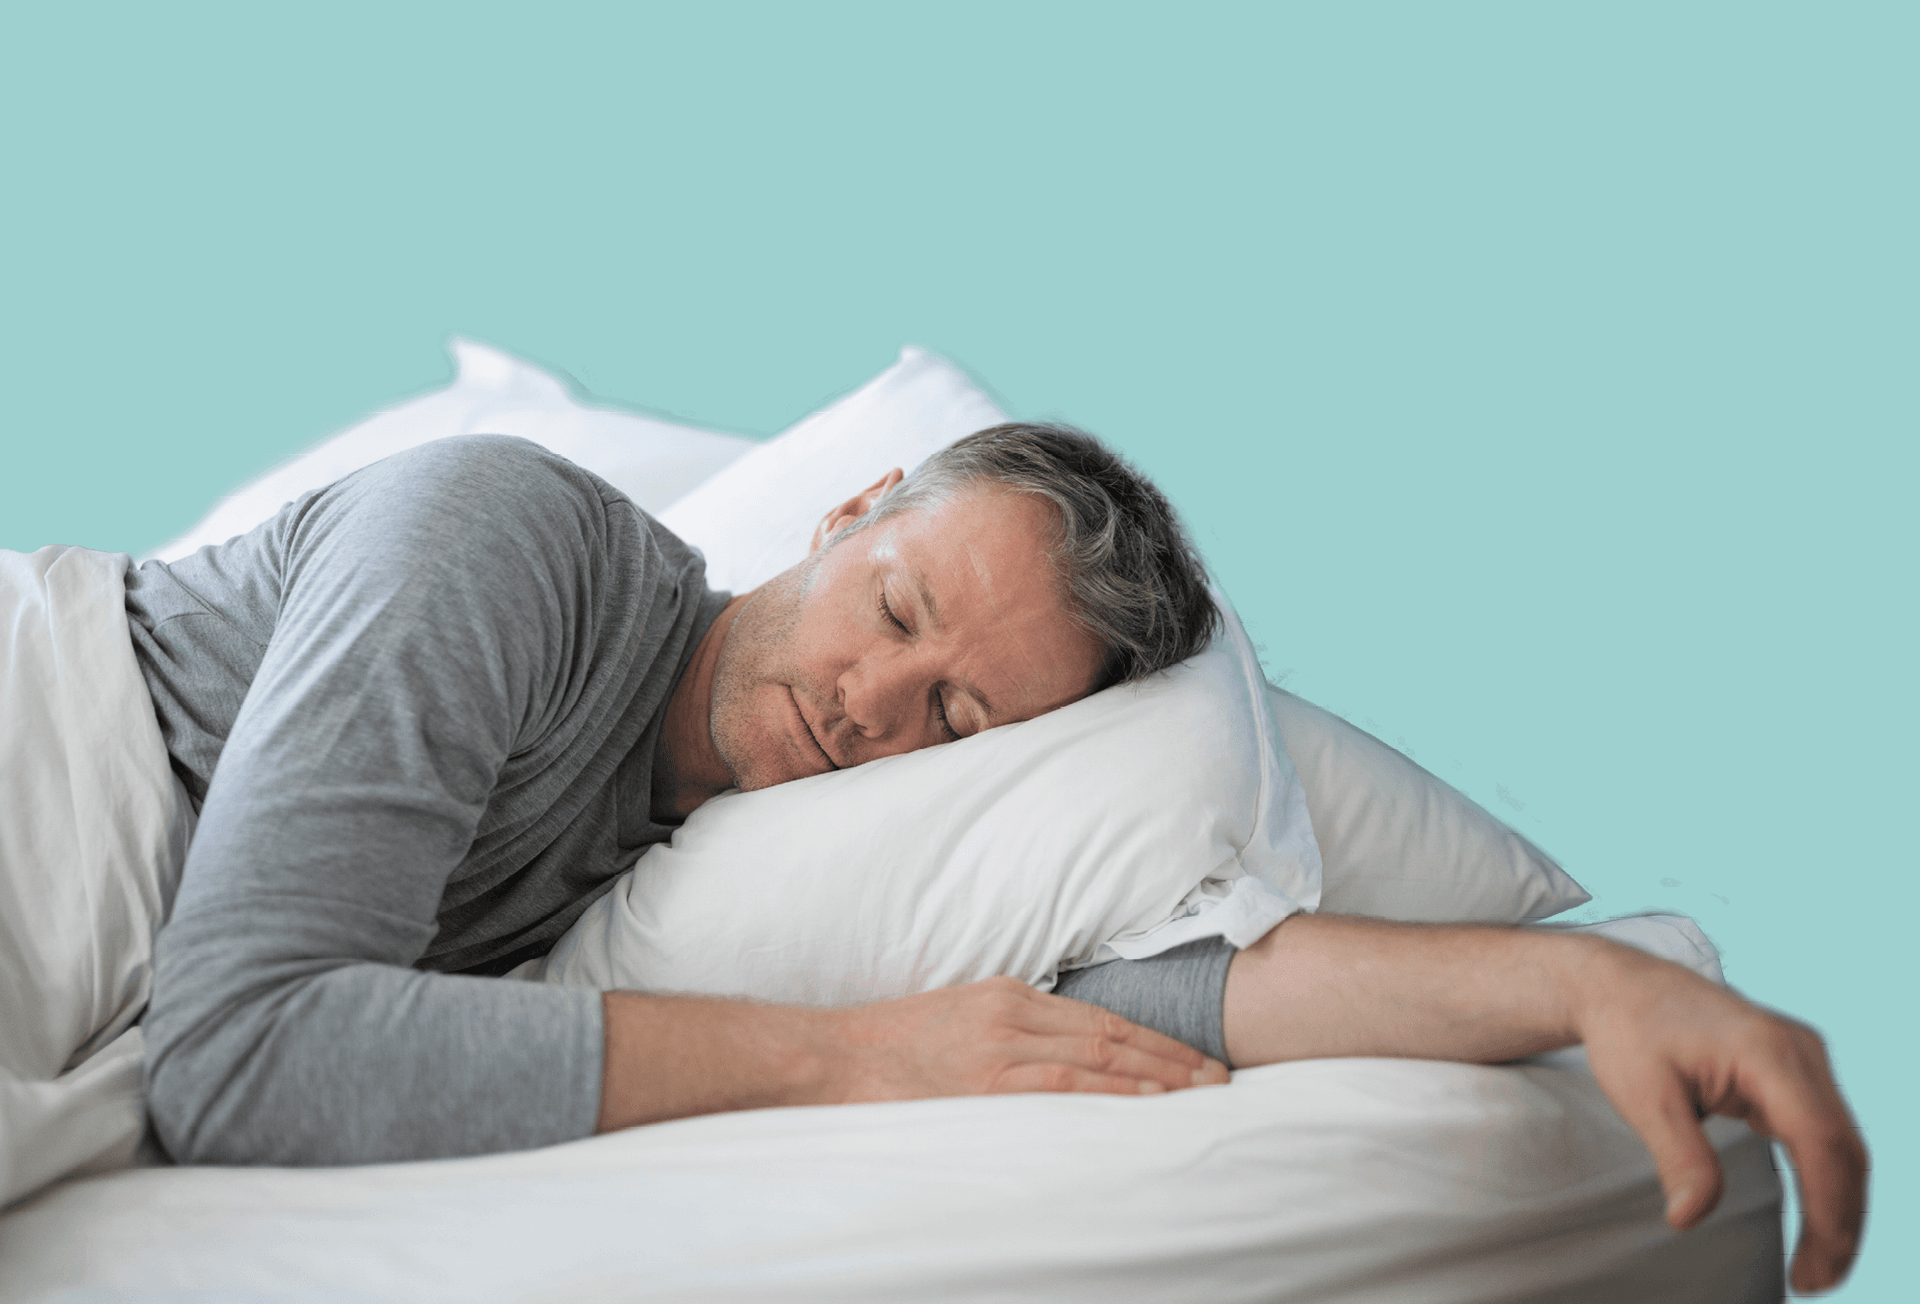 Man sleeping to recharge and help his well-being